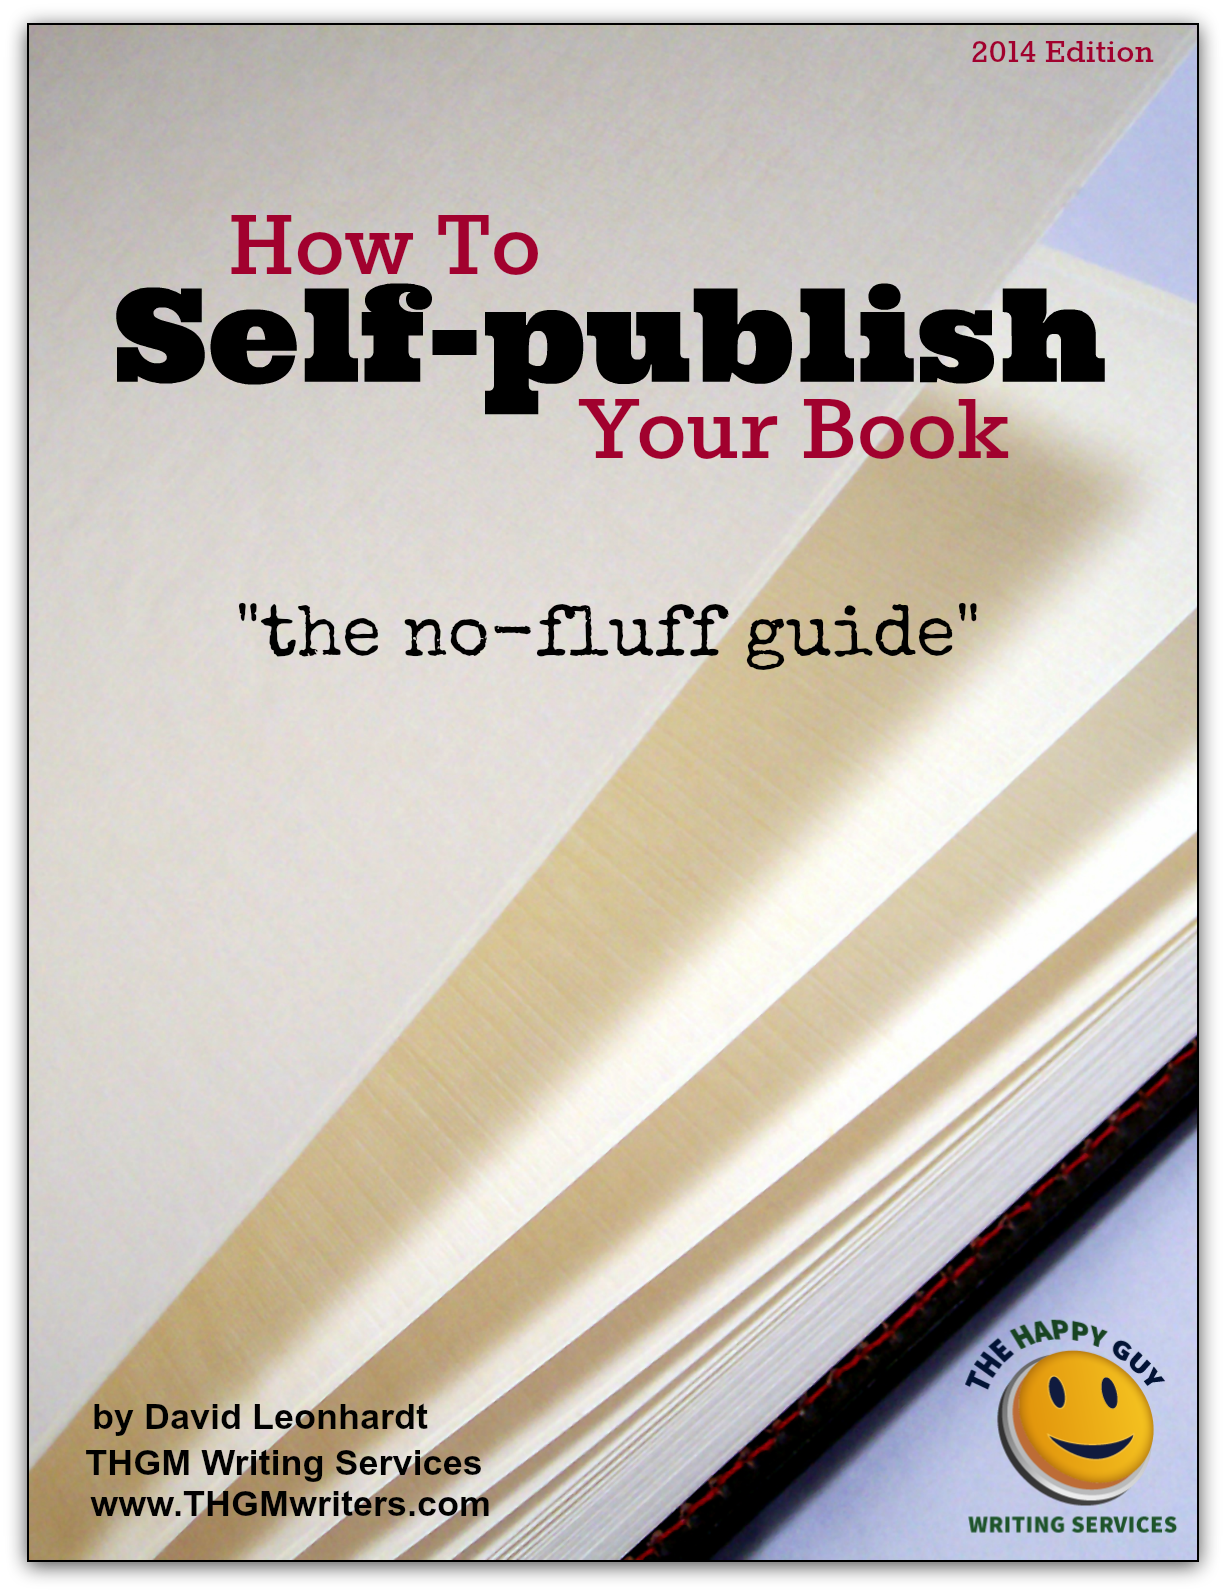 How To Self-publish Your Book